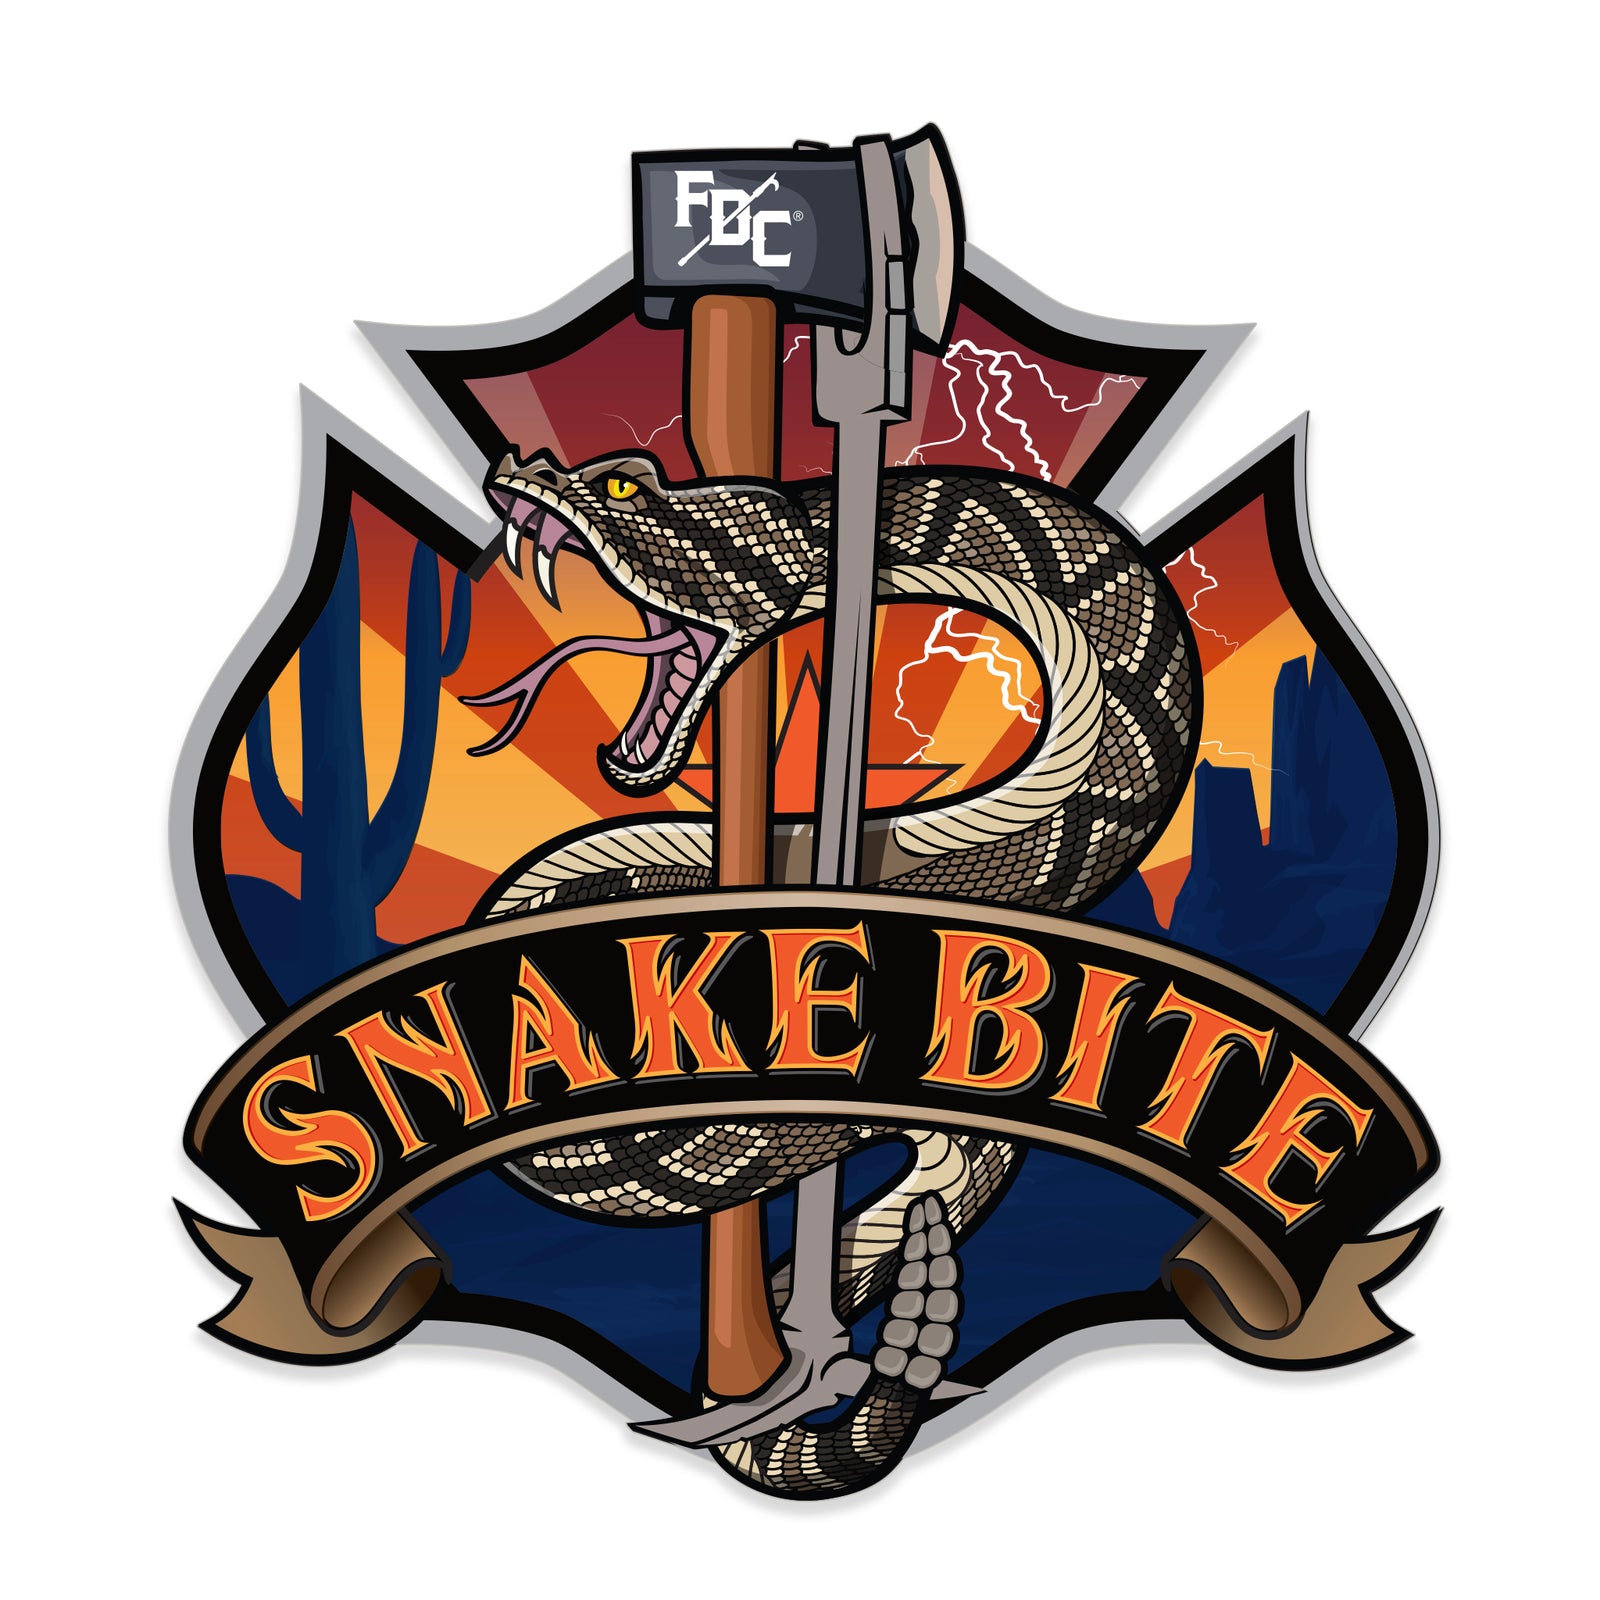 This sticker's background is a landscape of the desert and the indigenous rattlesnake wrapped around a set of irons. The text on the sticker reads, "Snake Bite".